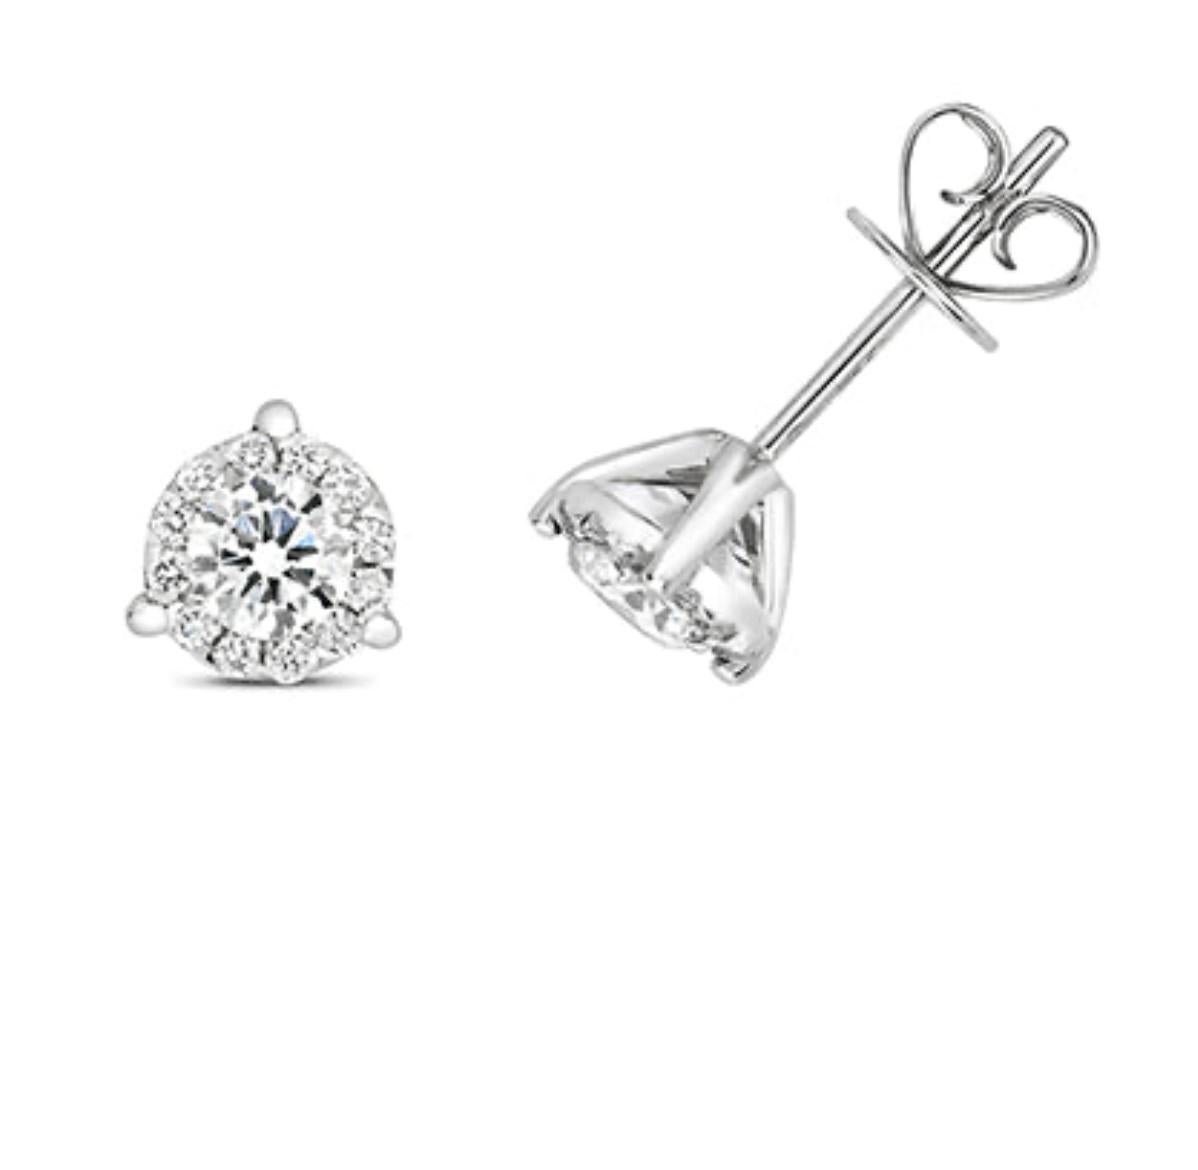 Women's 0.61ct Diamond Earrings Solitaire Halo Studs in 18ct White Gold G SI1 For Sale